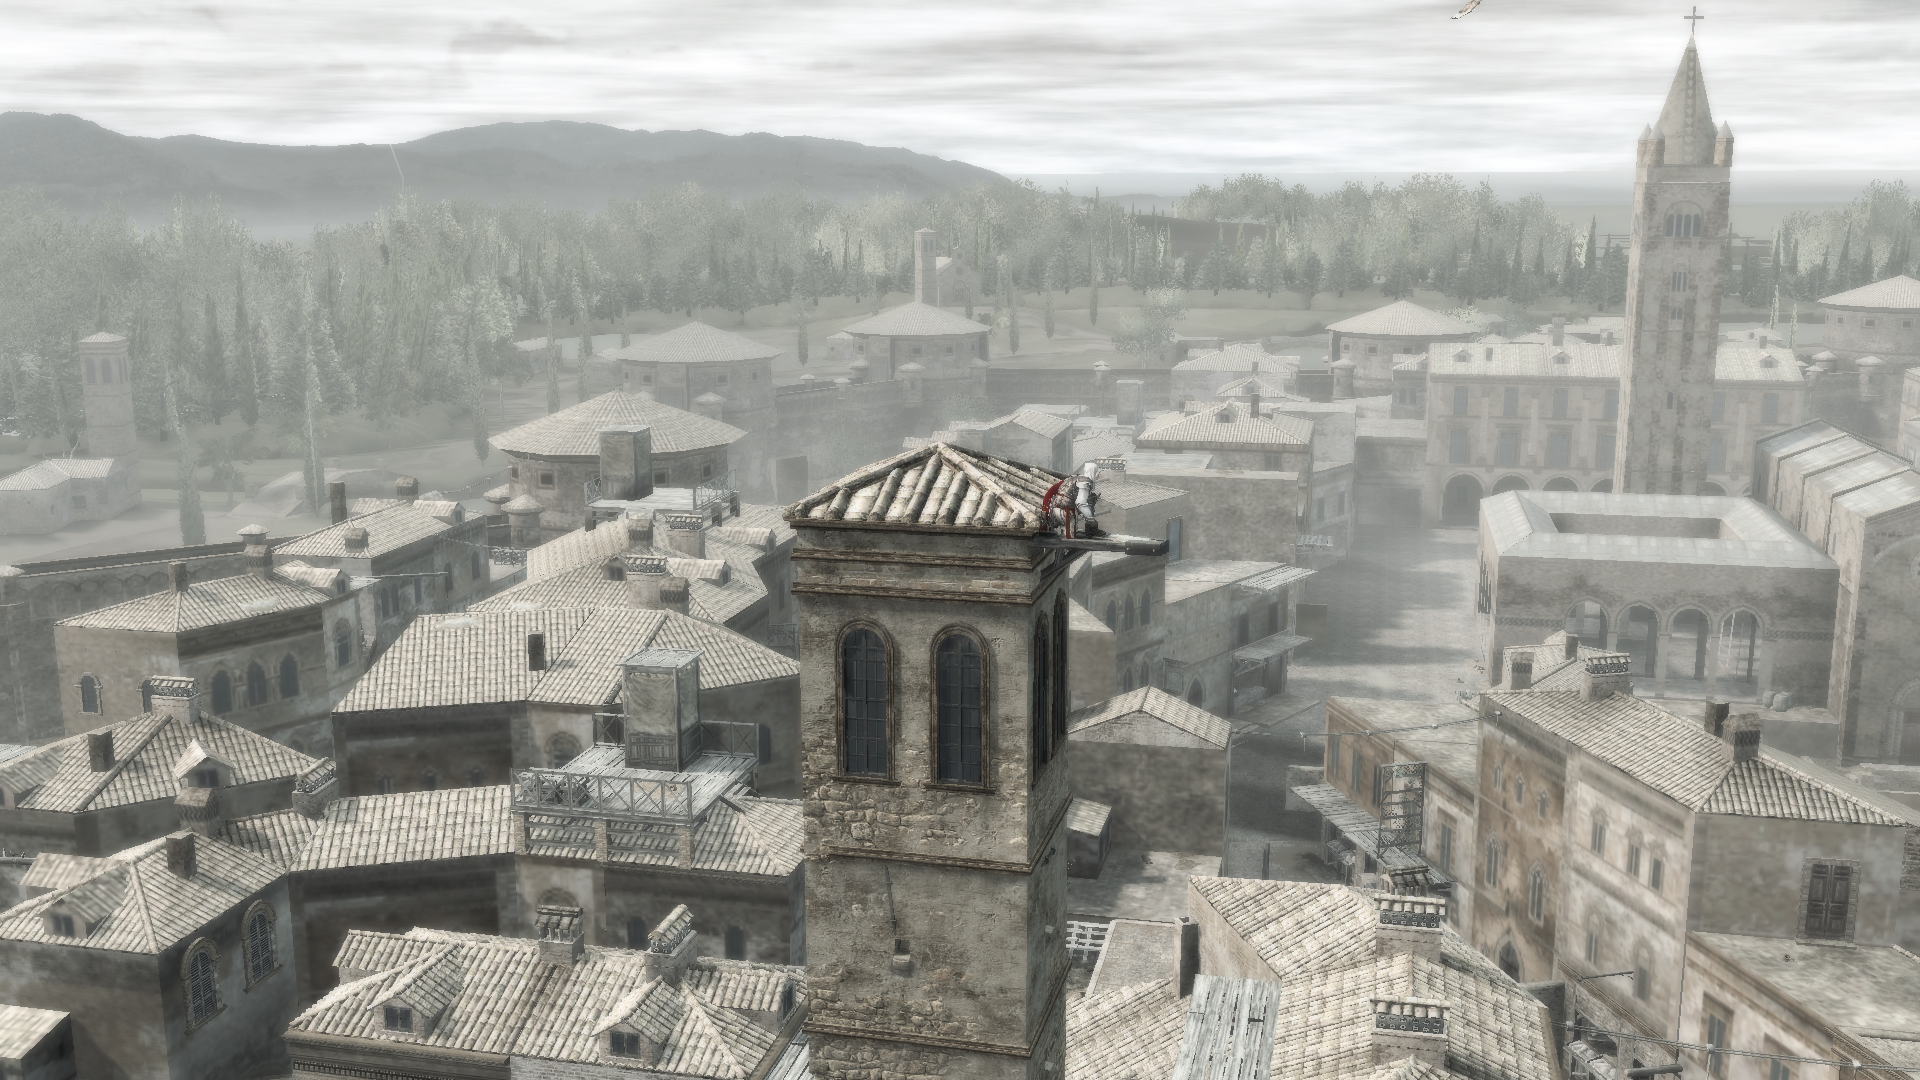 Forlì, Assassin's Creed Wiki